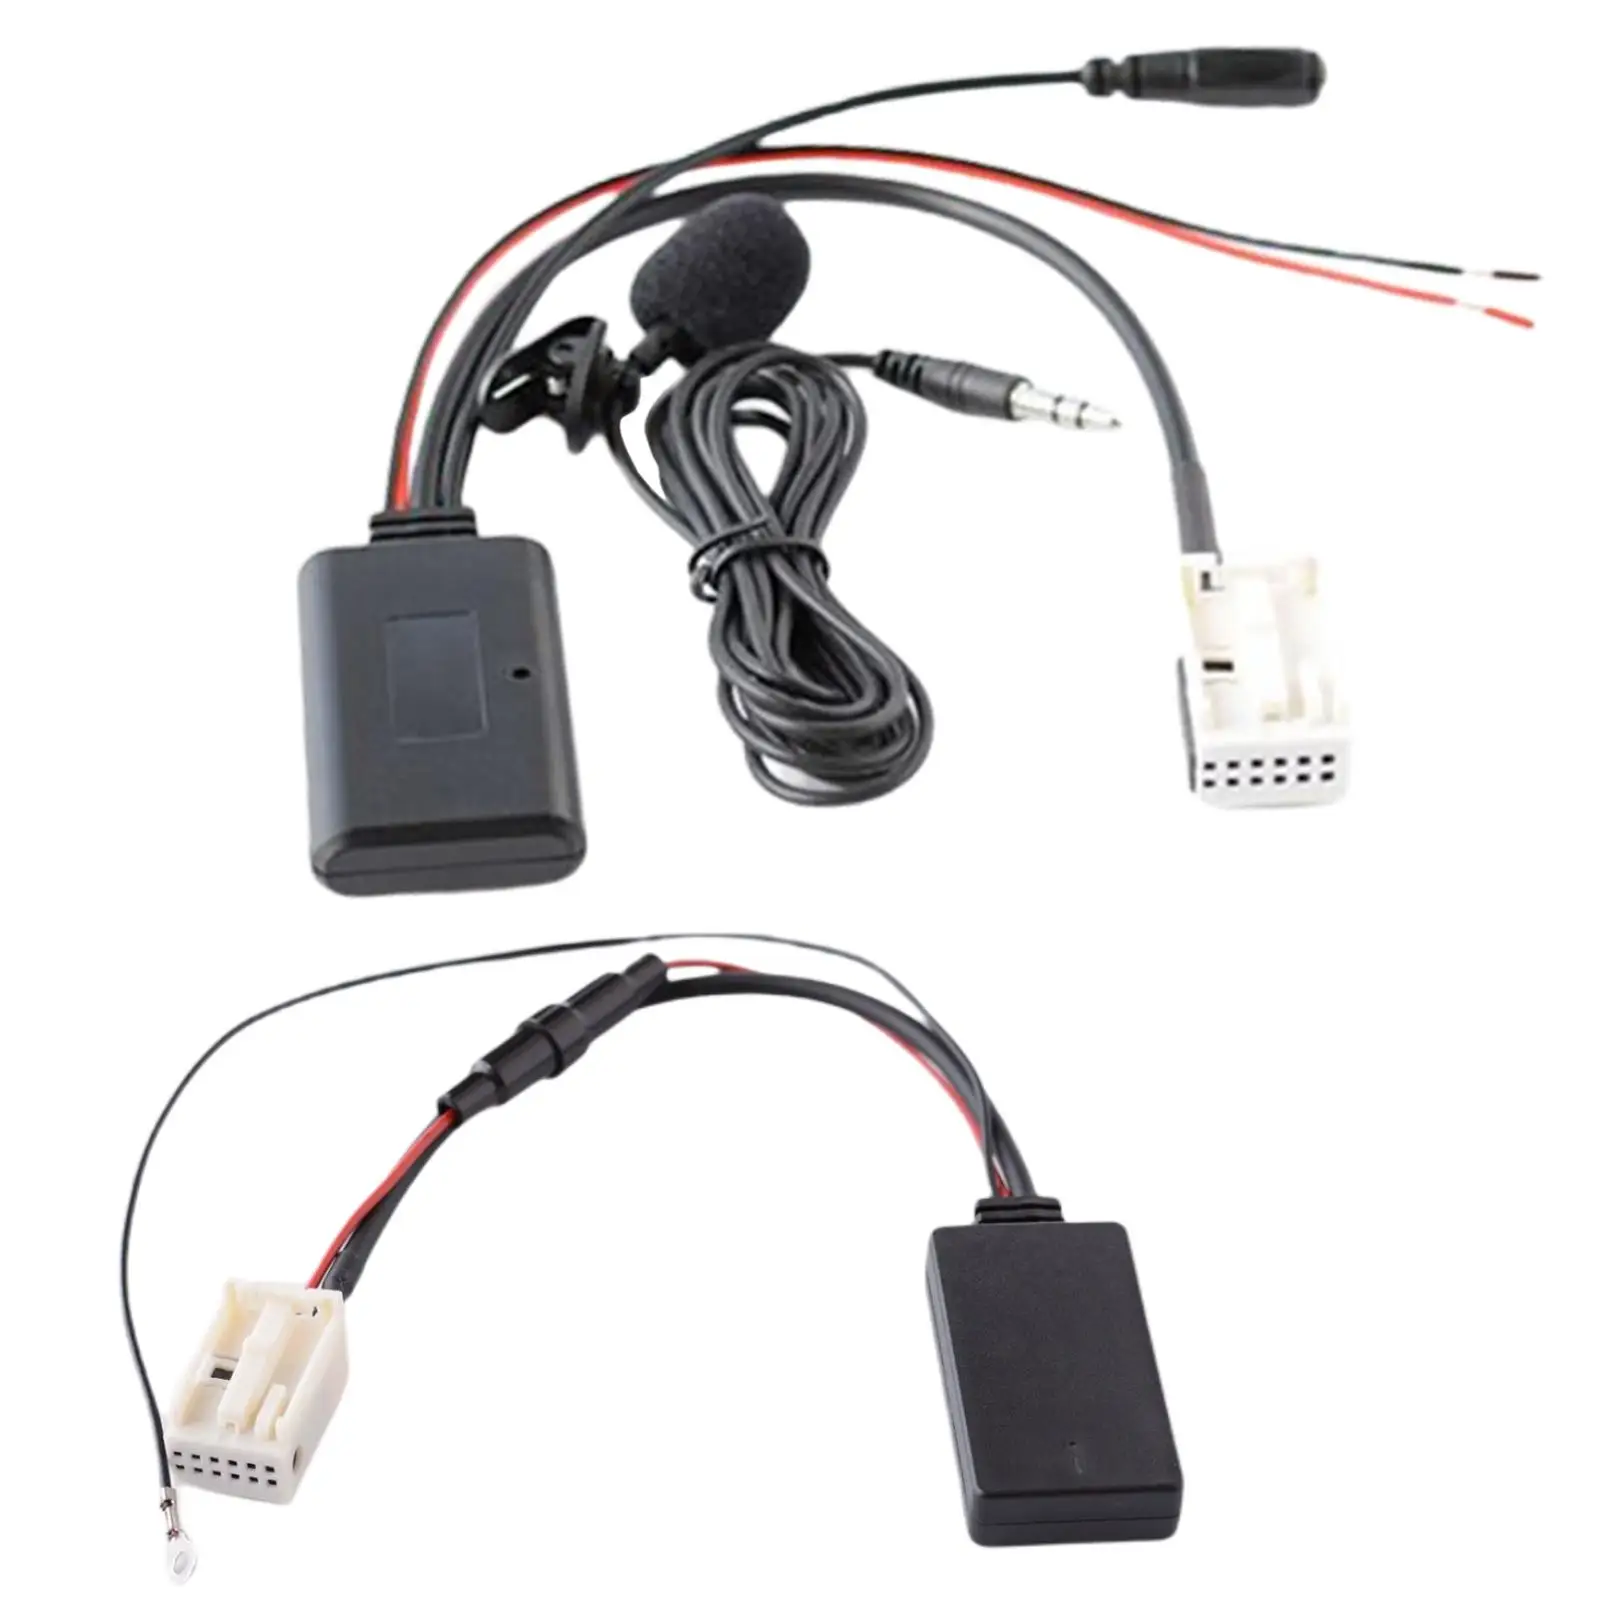 Car Bluetooth 5.0 Audio Adapter Handsfree Device for RCD310 RCD510 RNS510